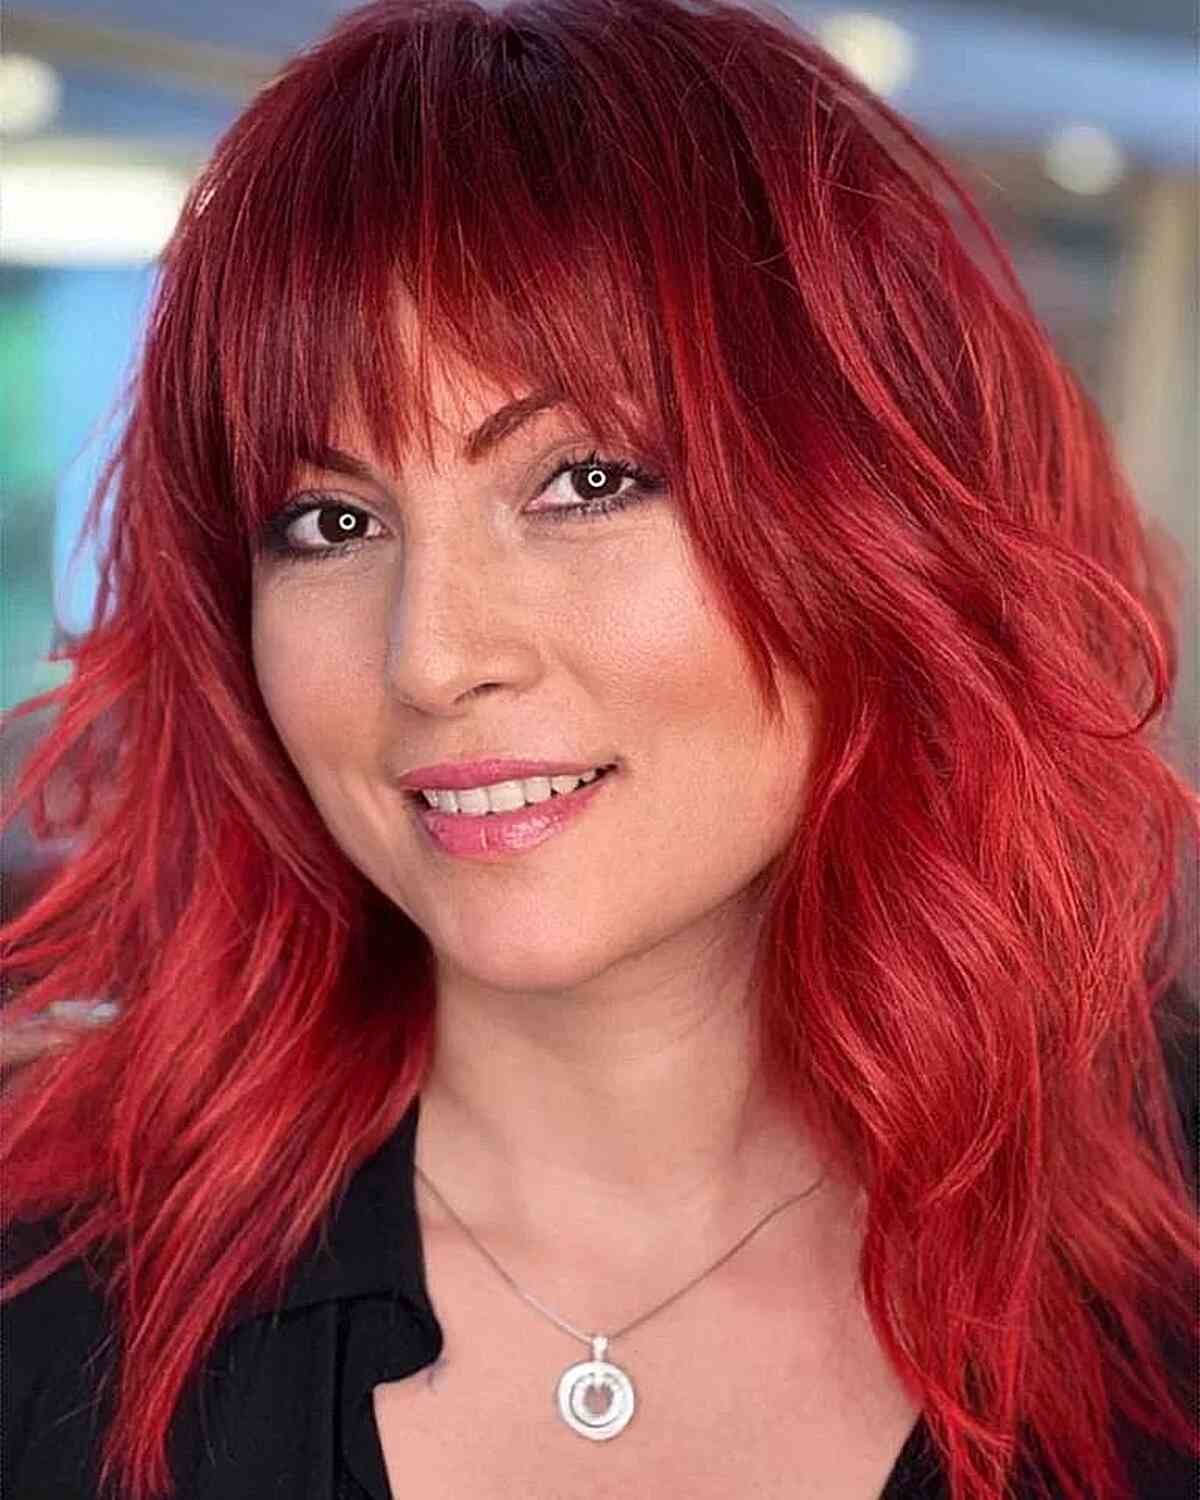 Bright and Vivid All-Over Red Hair for women with an edgy style